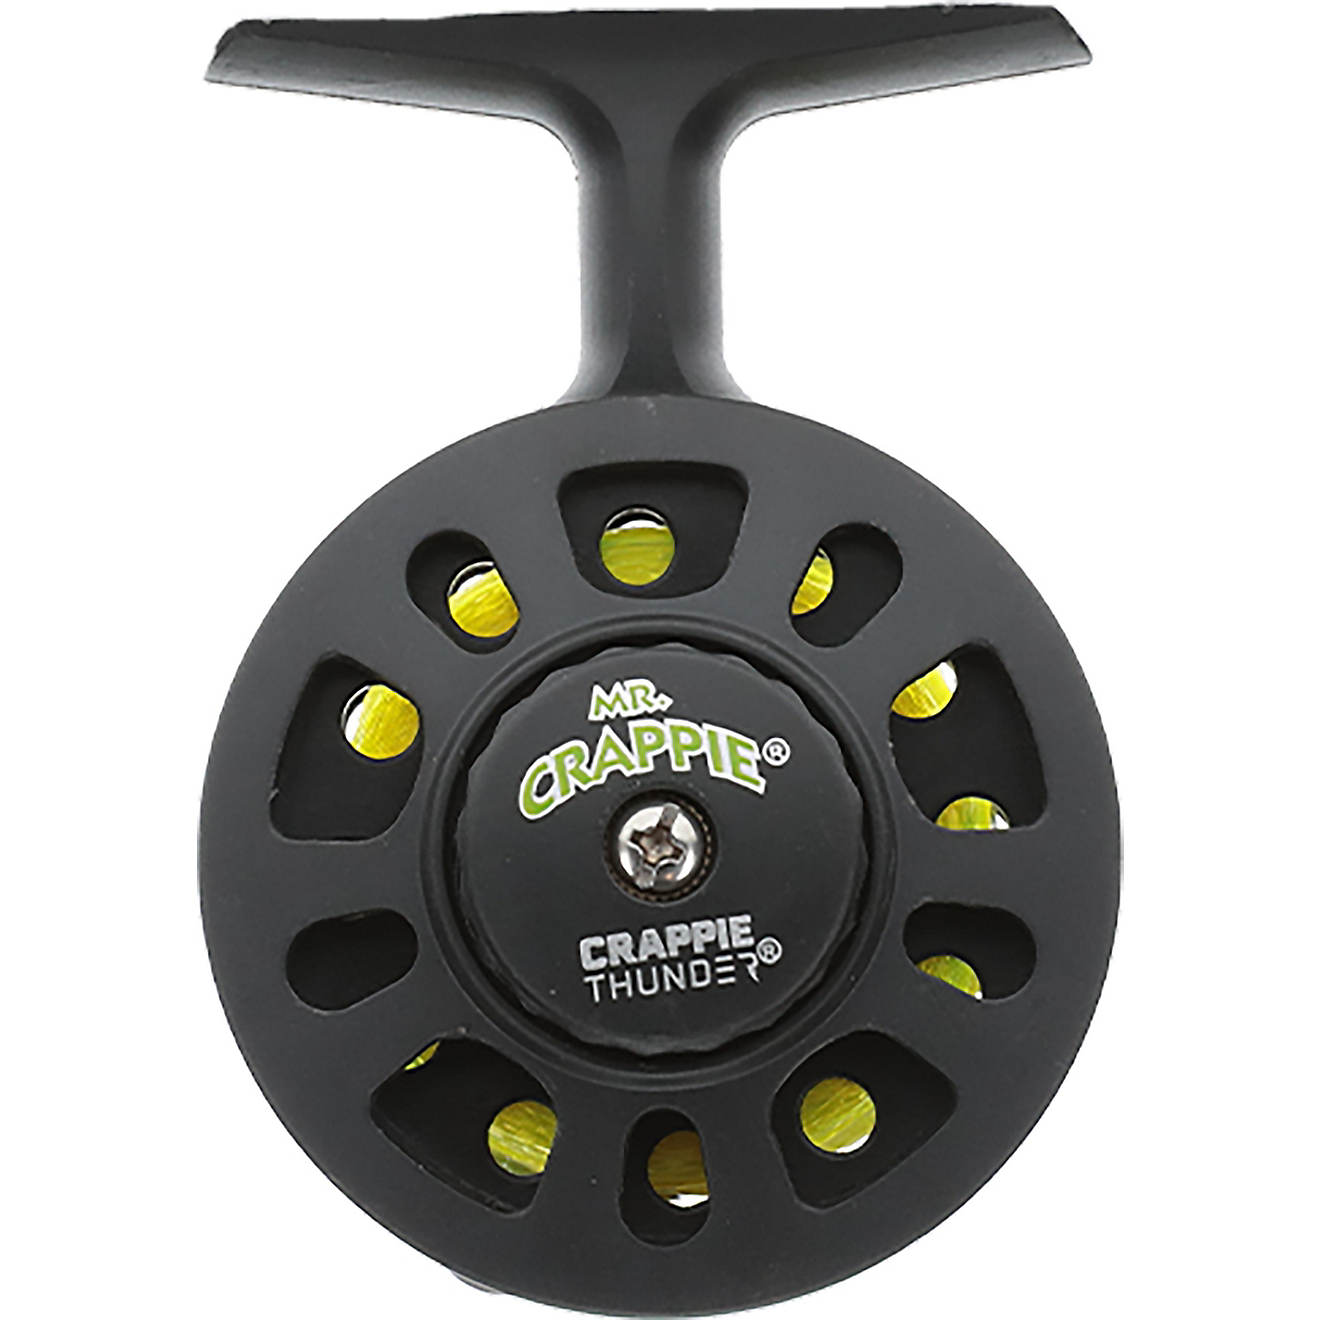 Crappie Thunder Solo Jig Reel